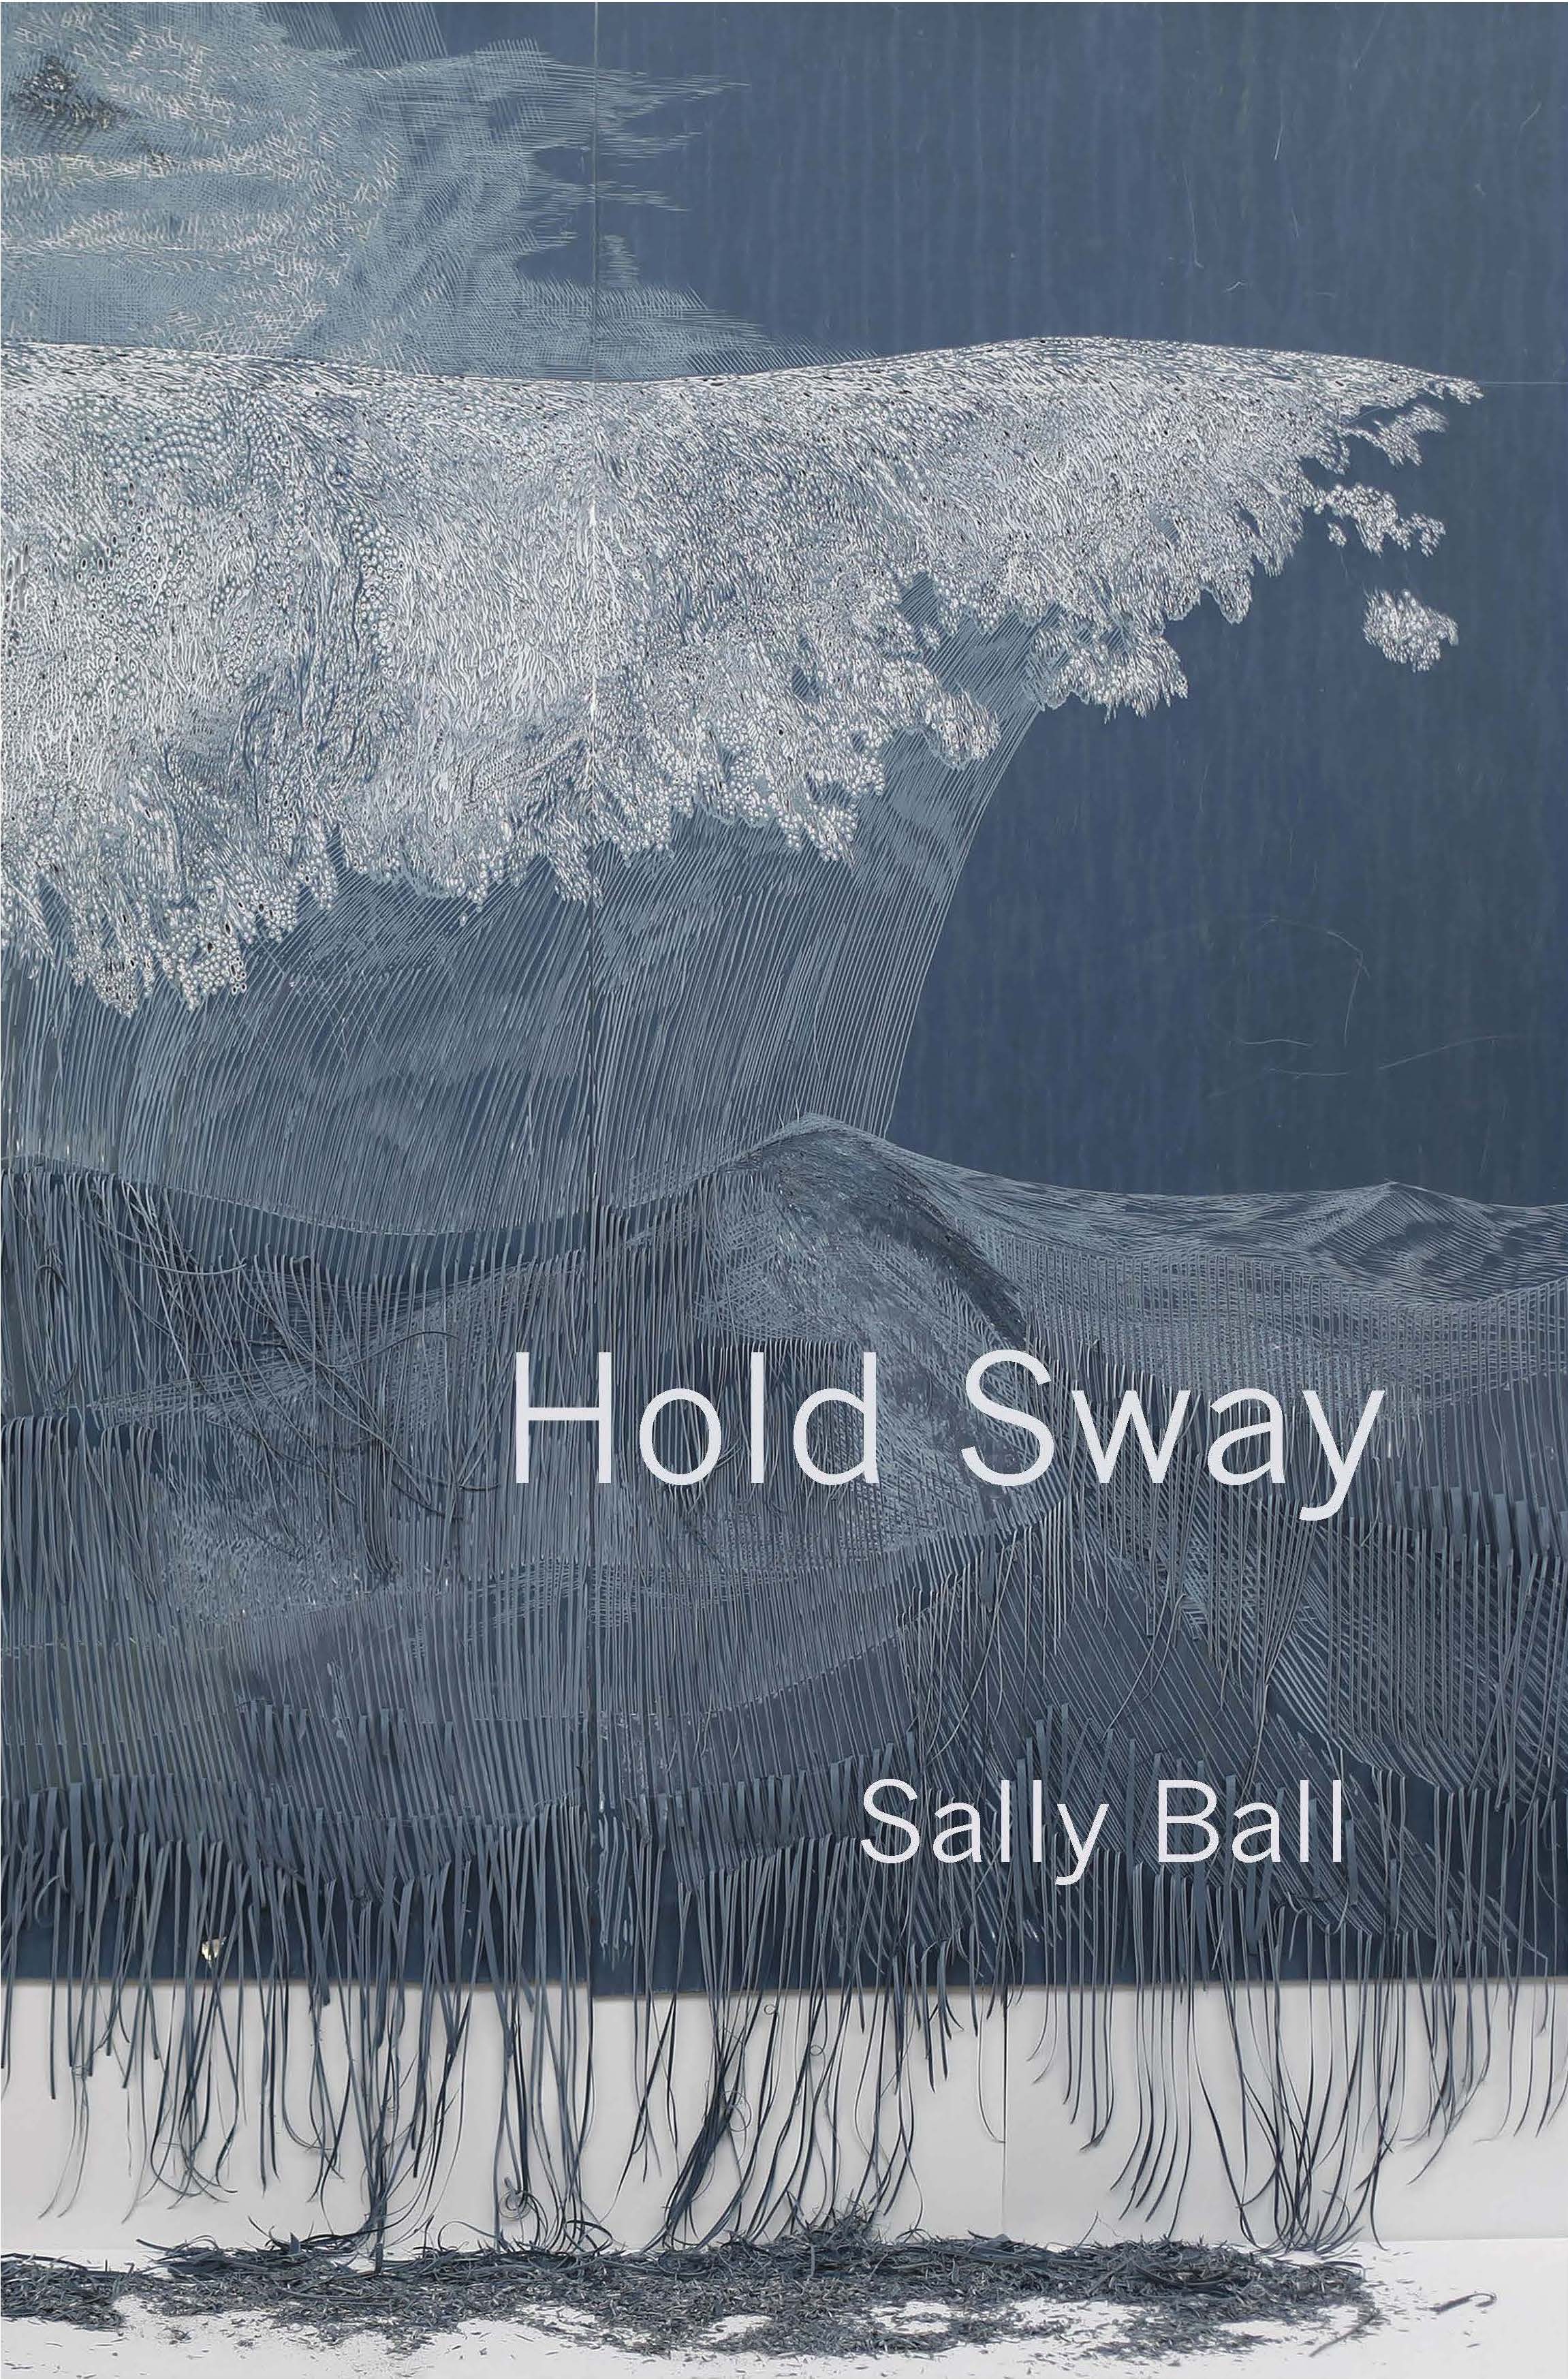 Cover of "Hold Sway" by Sally Ball (Barrow Street Press 2019)